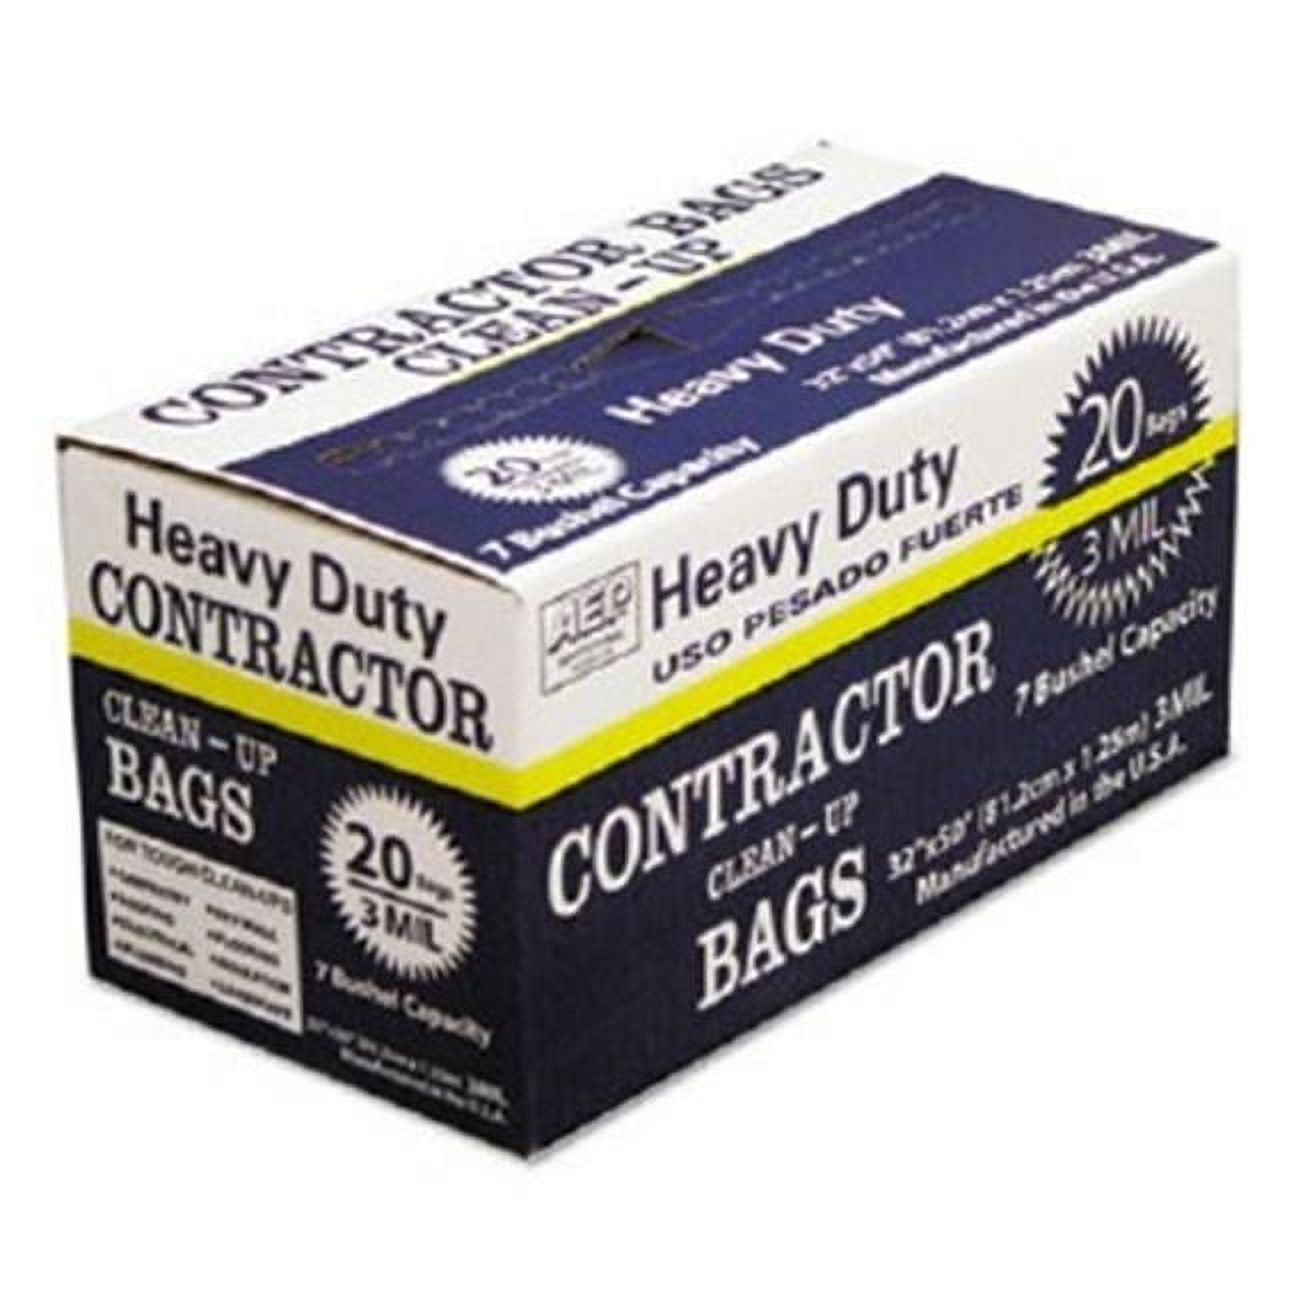 Webster Industries  32 x 50 in. Heavy-Duty Contractor Clean-up Bags - 55-60 gal, Black - 20 Carton - image 1 of 1